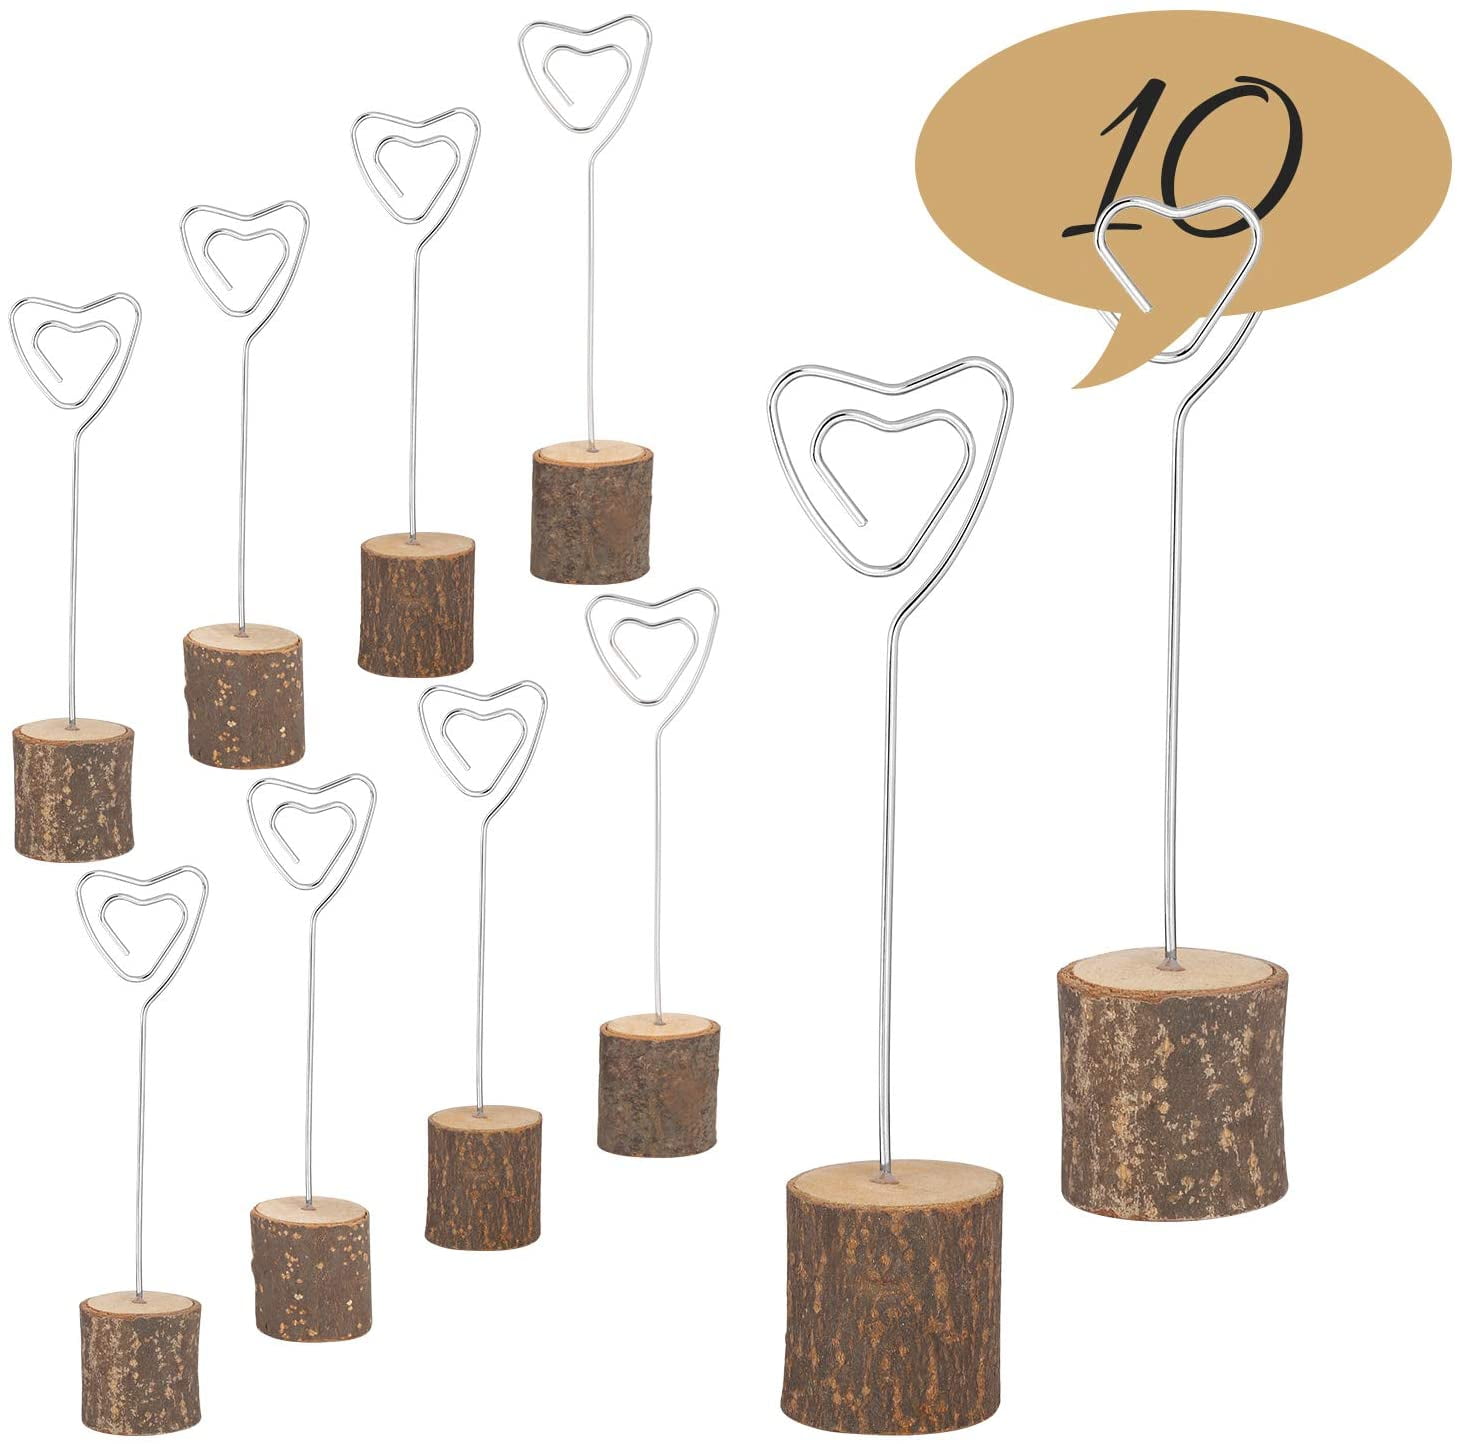 Wedding Name Place Decoration Card Memo Clip Holders for Party Office Photo Stand-10pcs Wooden Base Table Number Holders 